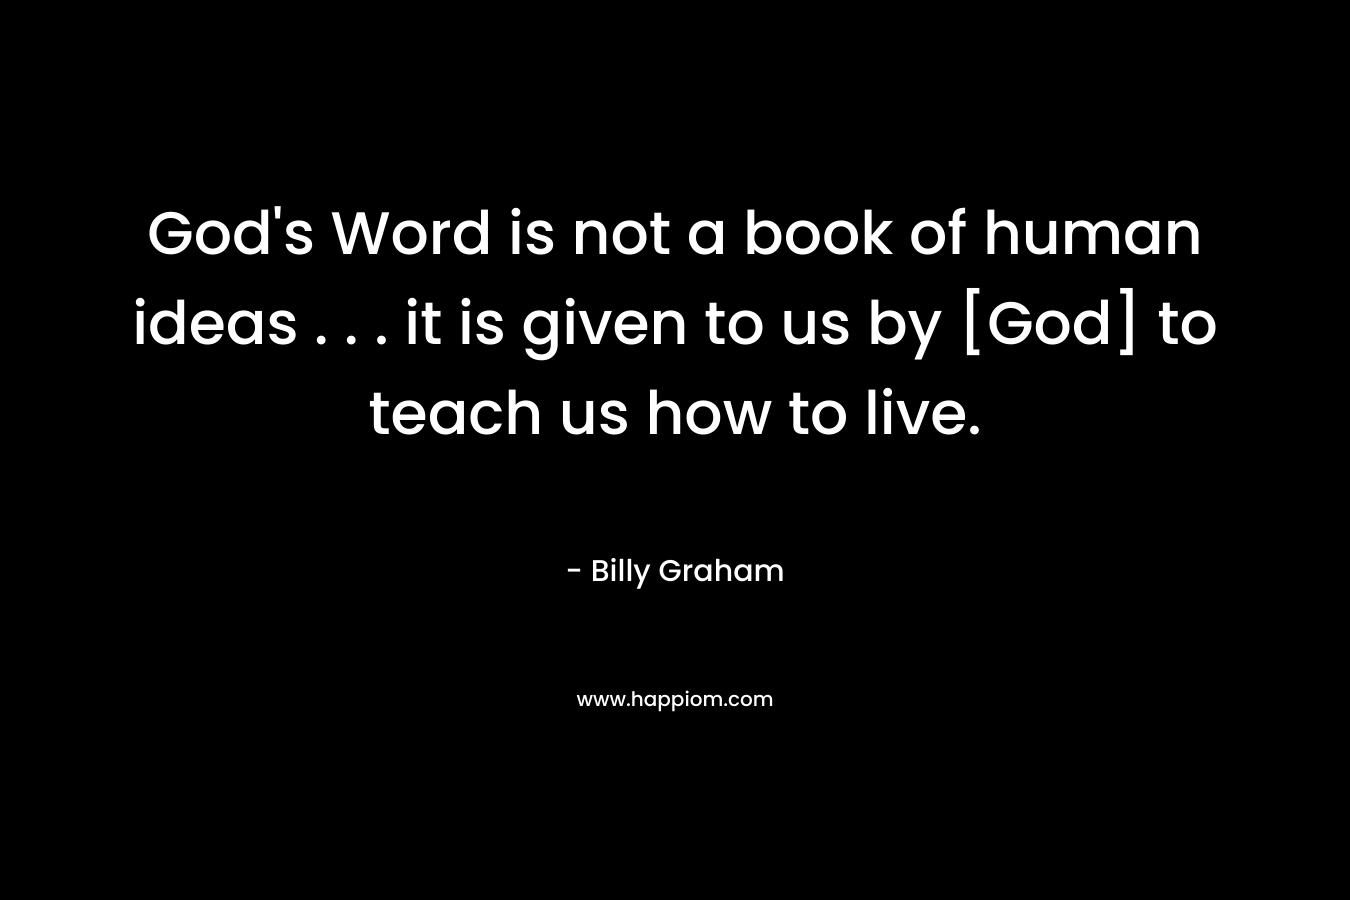 God's Word is not a book of human ideas . . . it is given to us by [God] to teach us how to live.